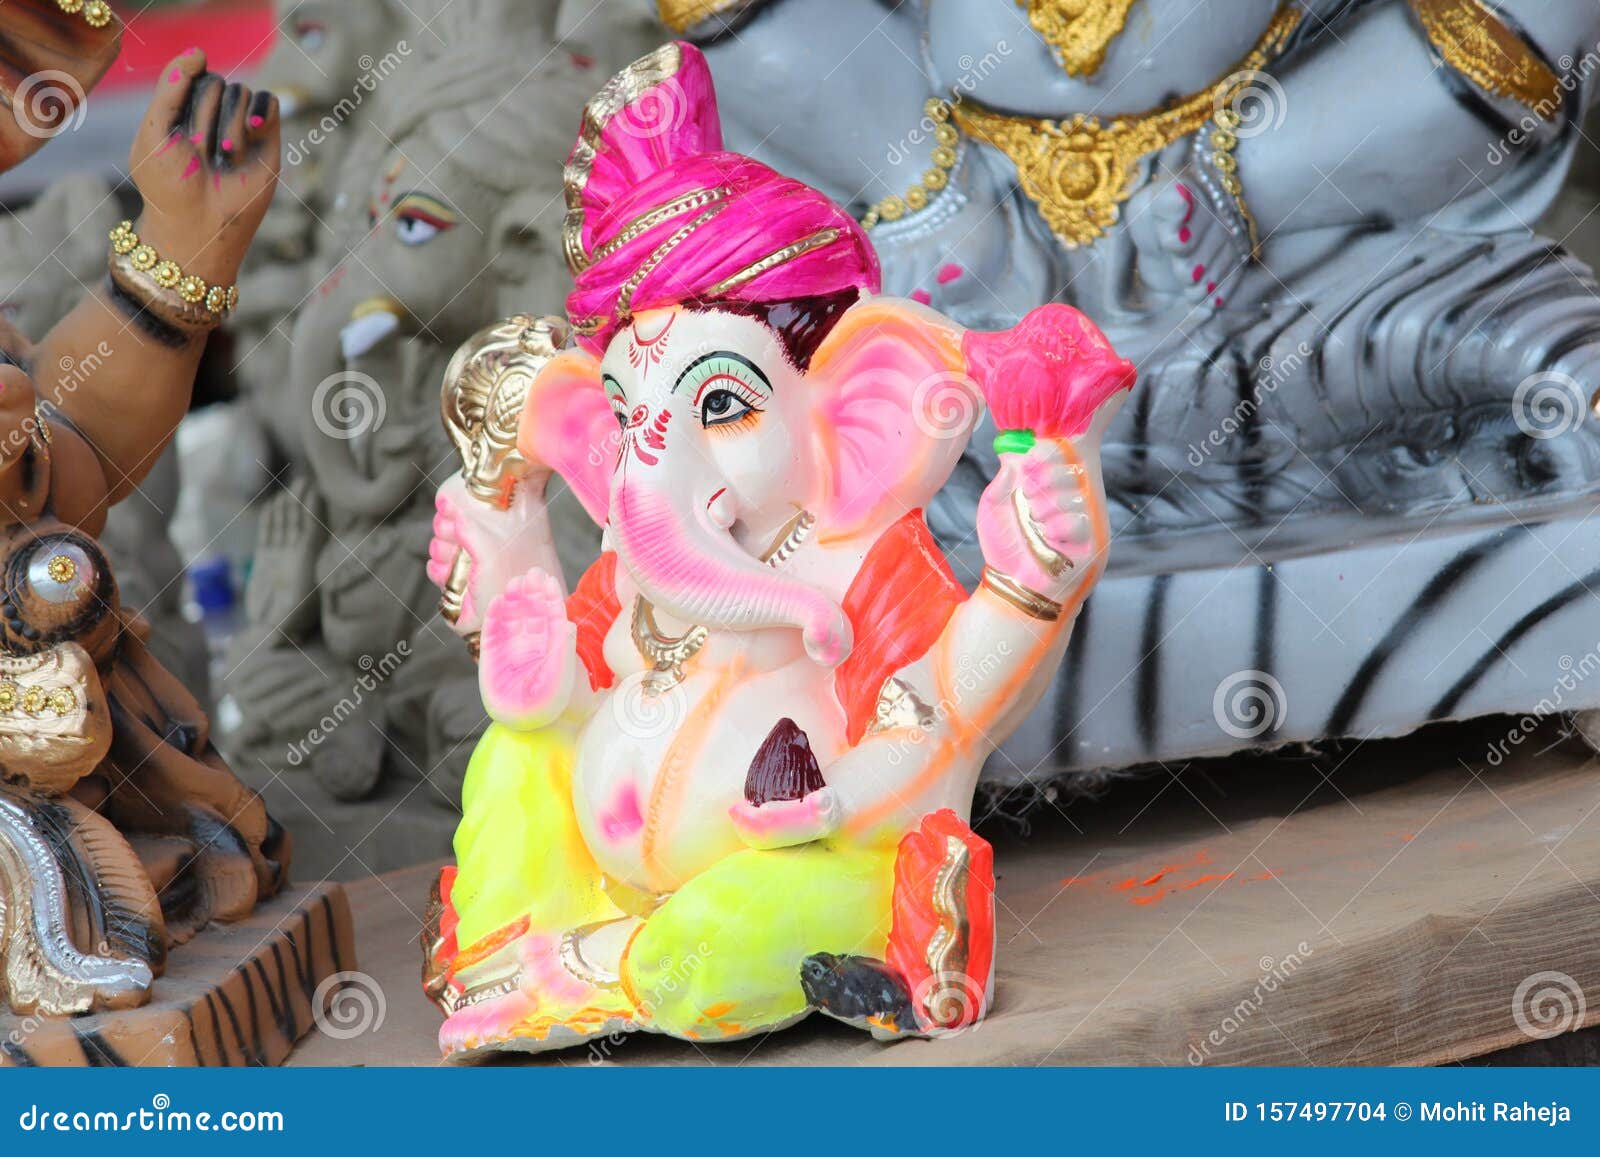 A Beautiful Clay Statue/Idol of an Indian God Lord Ganesha Decorated ...